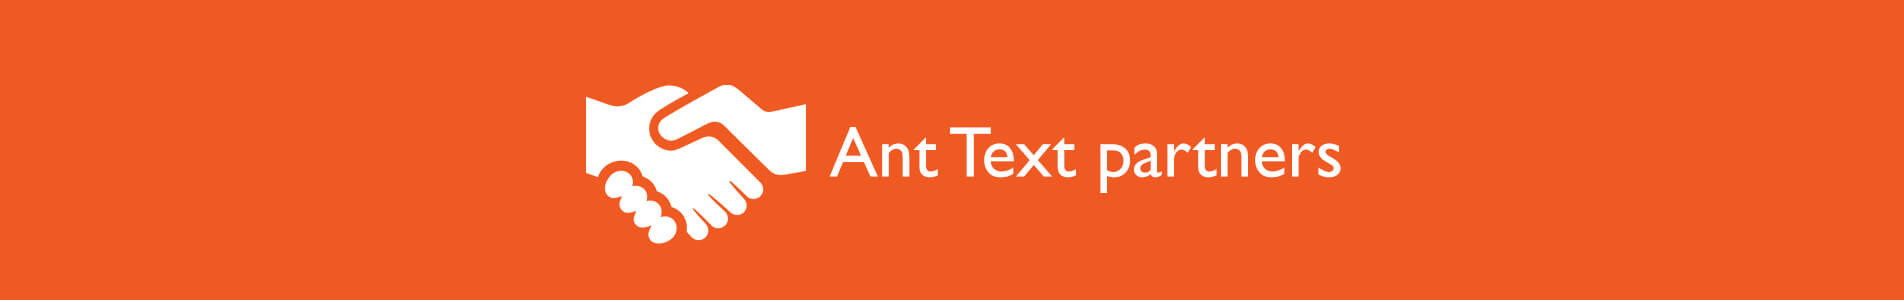 Header Ant Text partners